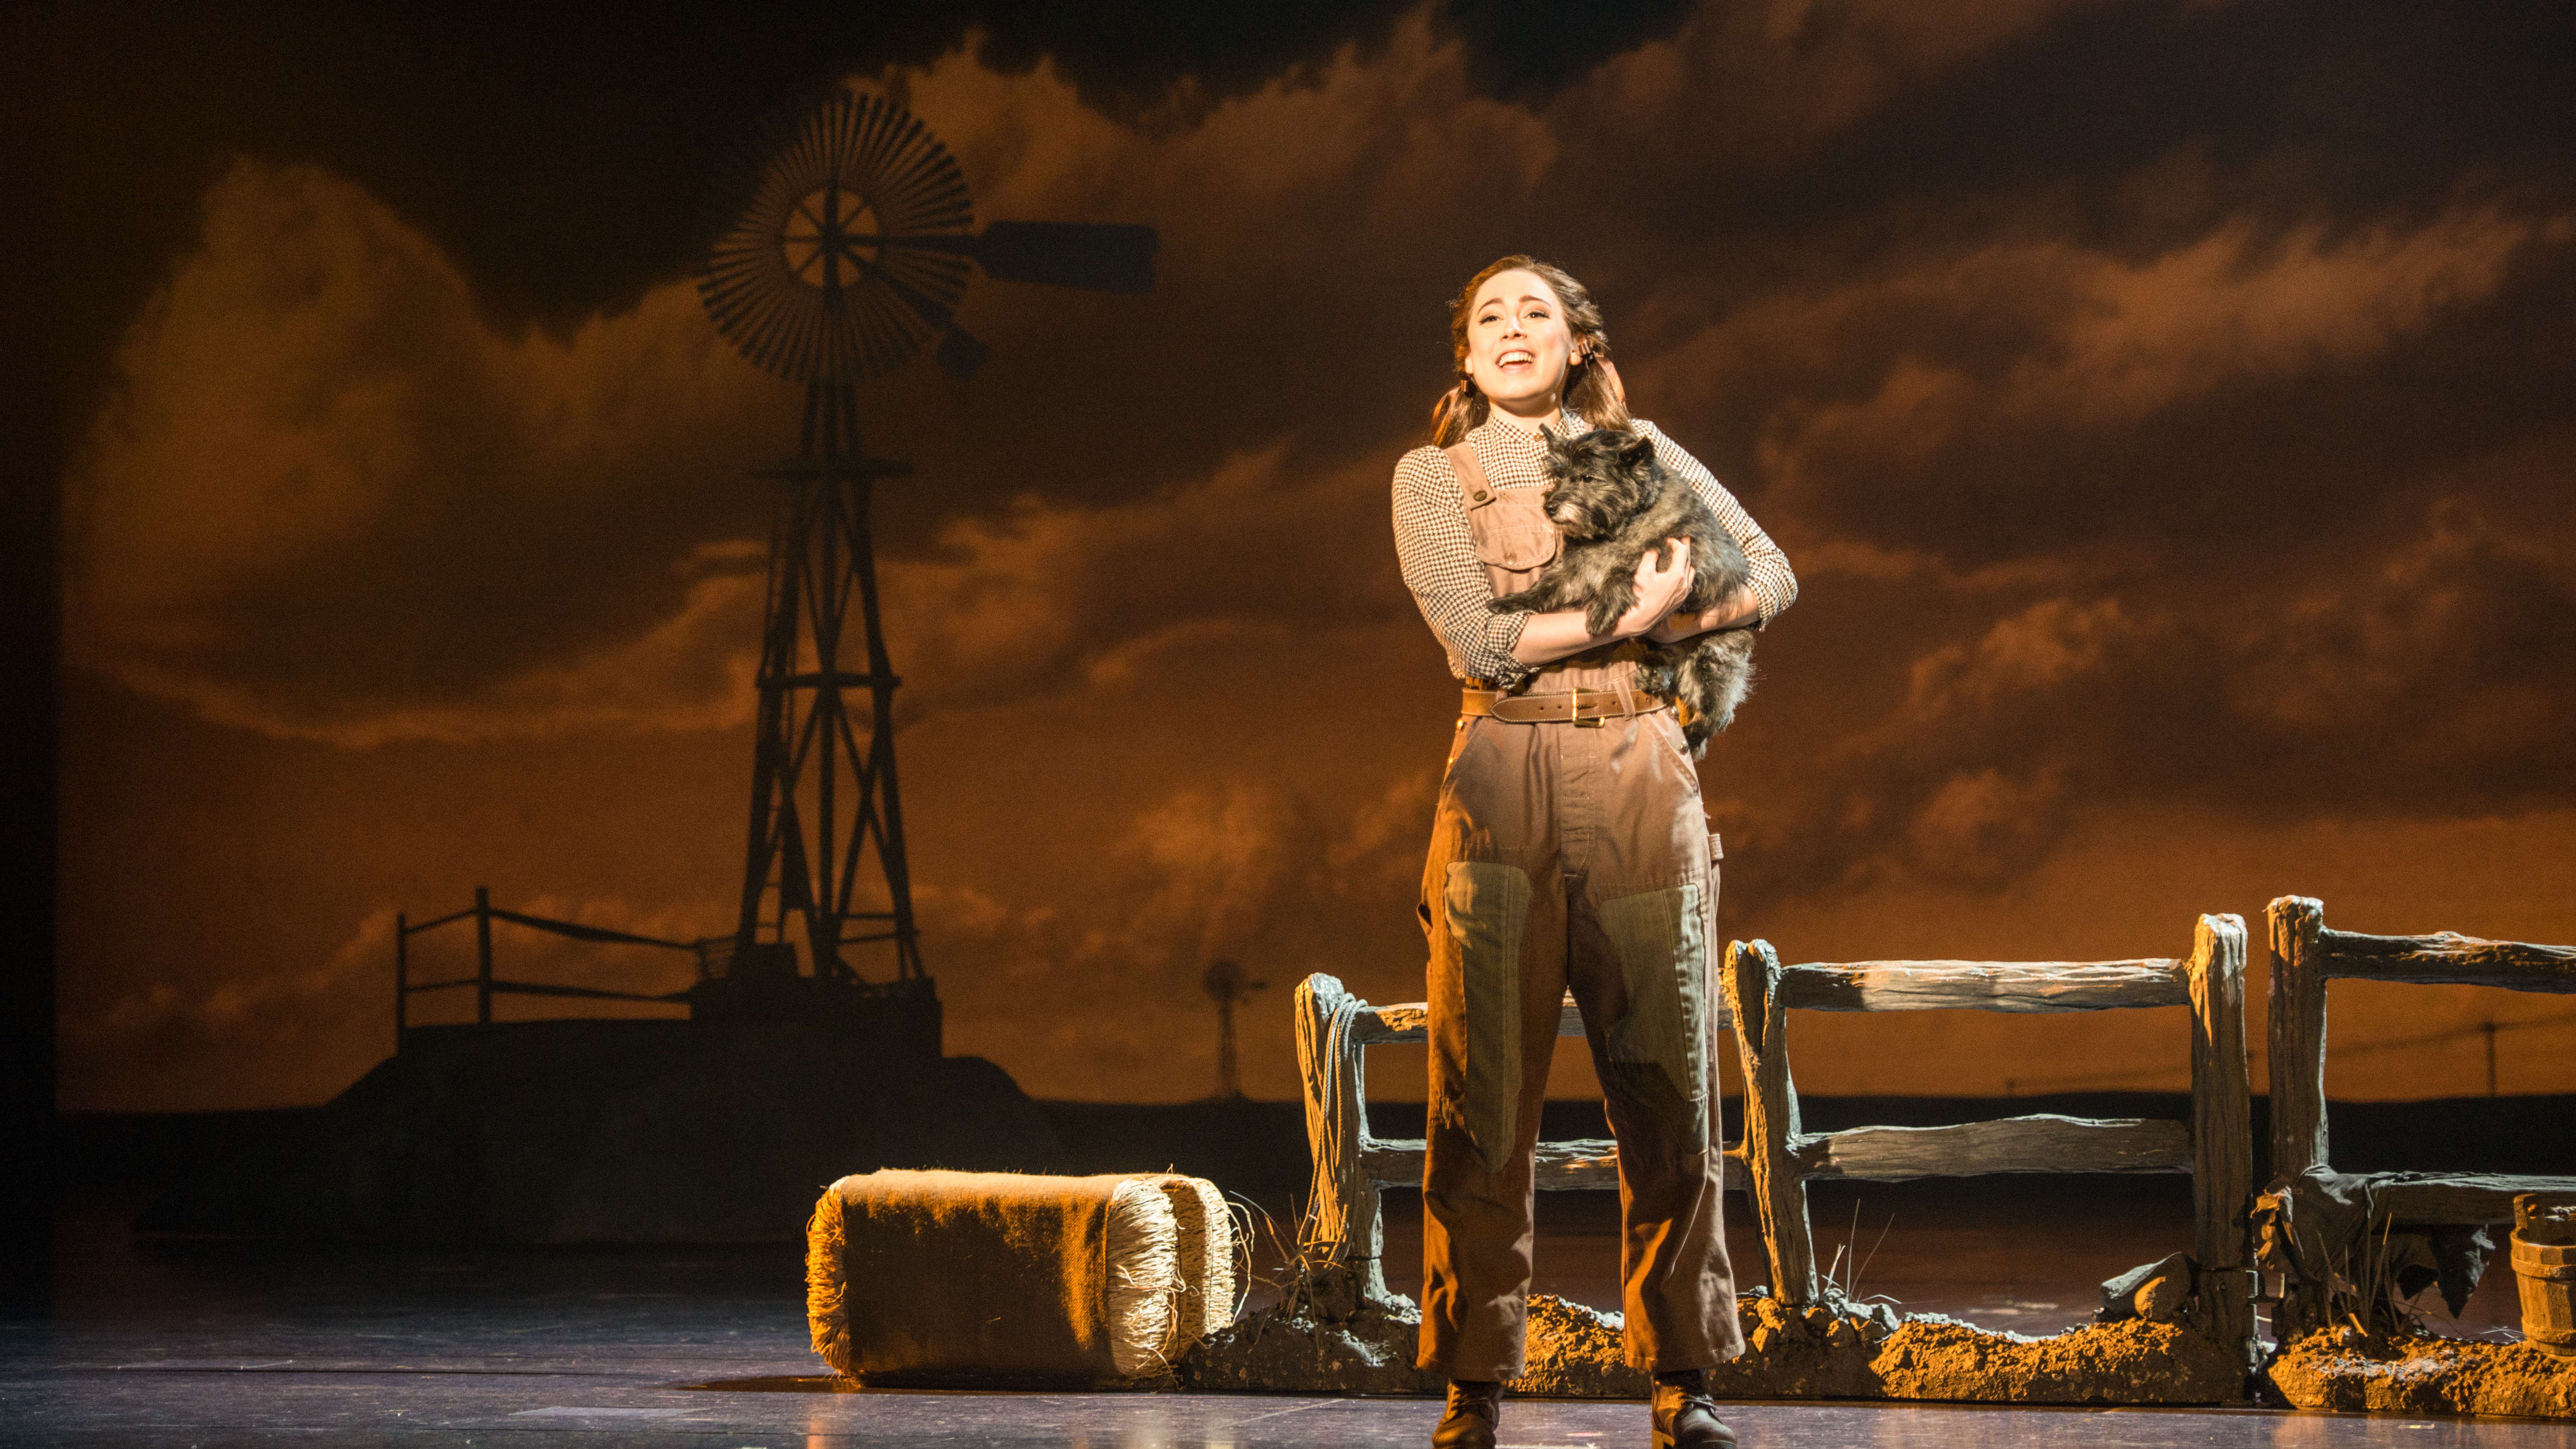 Sarah Lasko stars with Toto, one of Bill Berloni's rescue dogs, in the national tour of "The Wizard of Oz." (Daniel A Swalec)